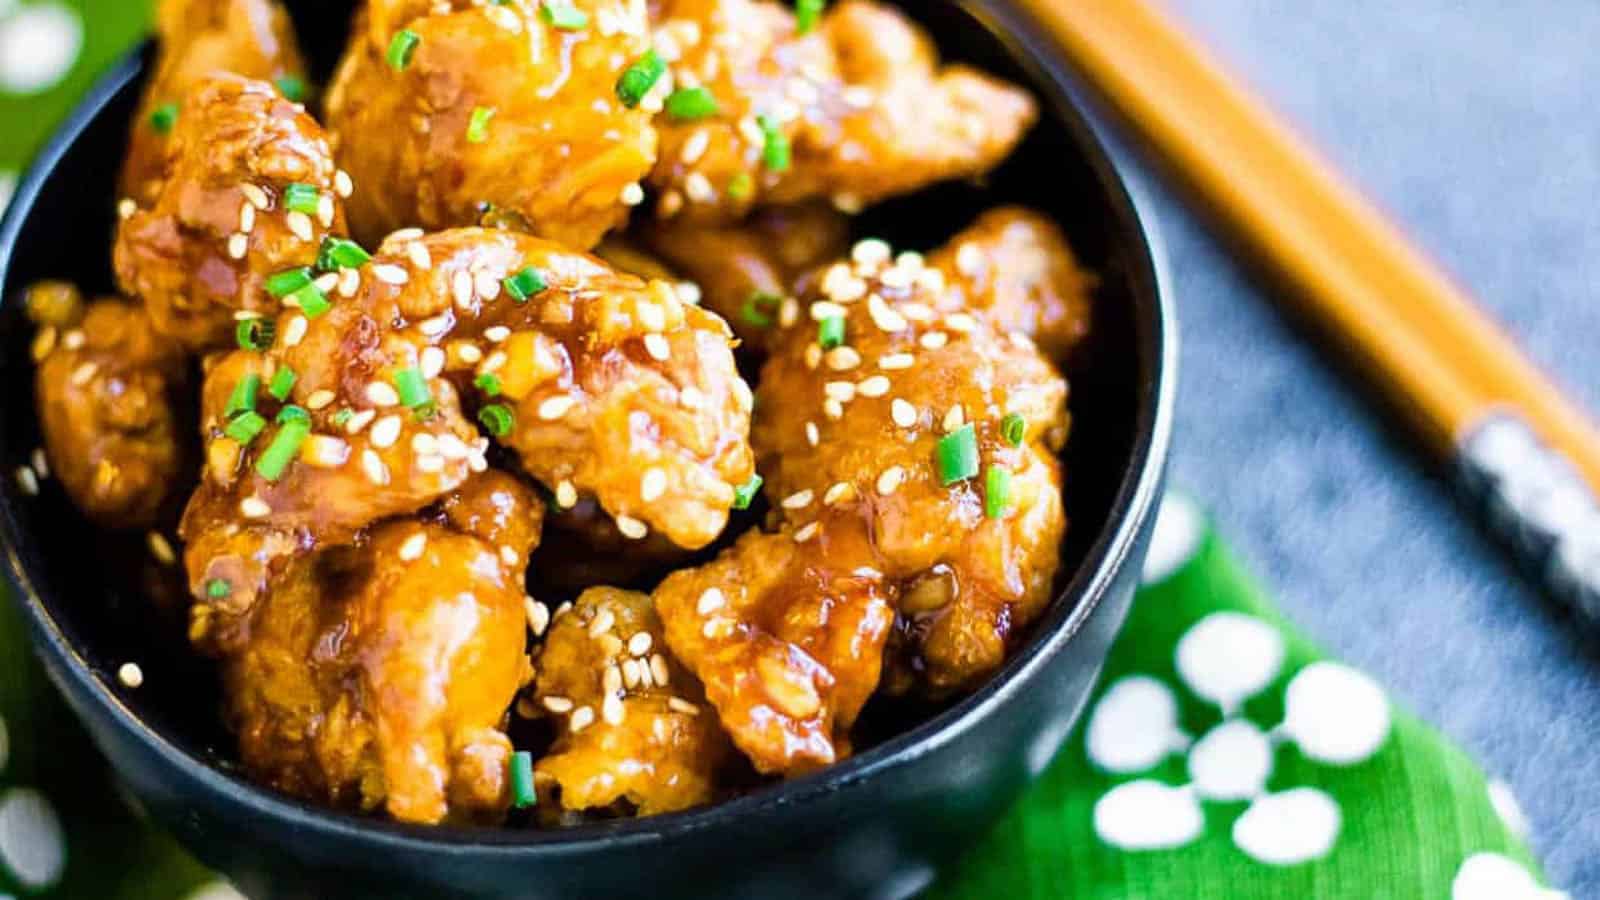 Fried chicken pieces in orange sauce garnished with sesame seeds in a black bowl with chopsticks and a green and white napkin.